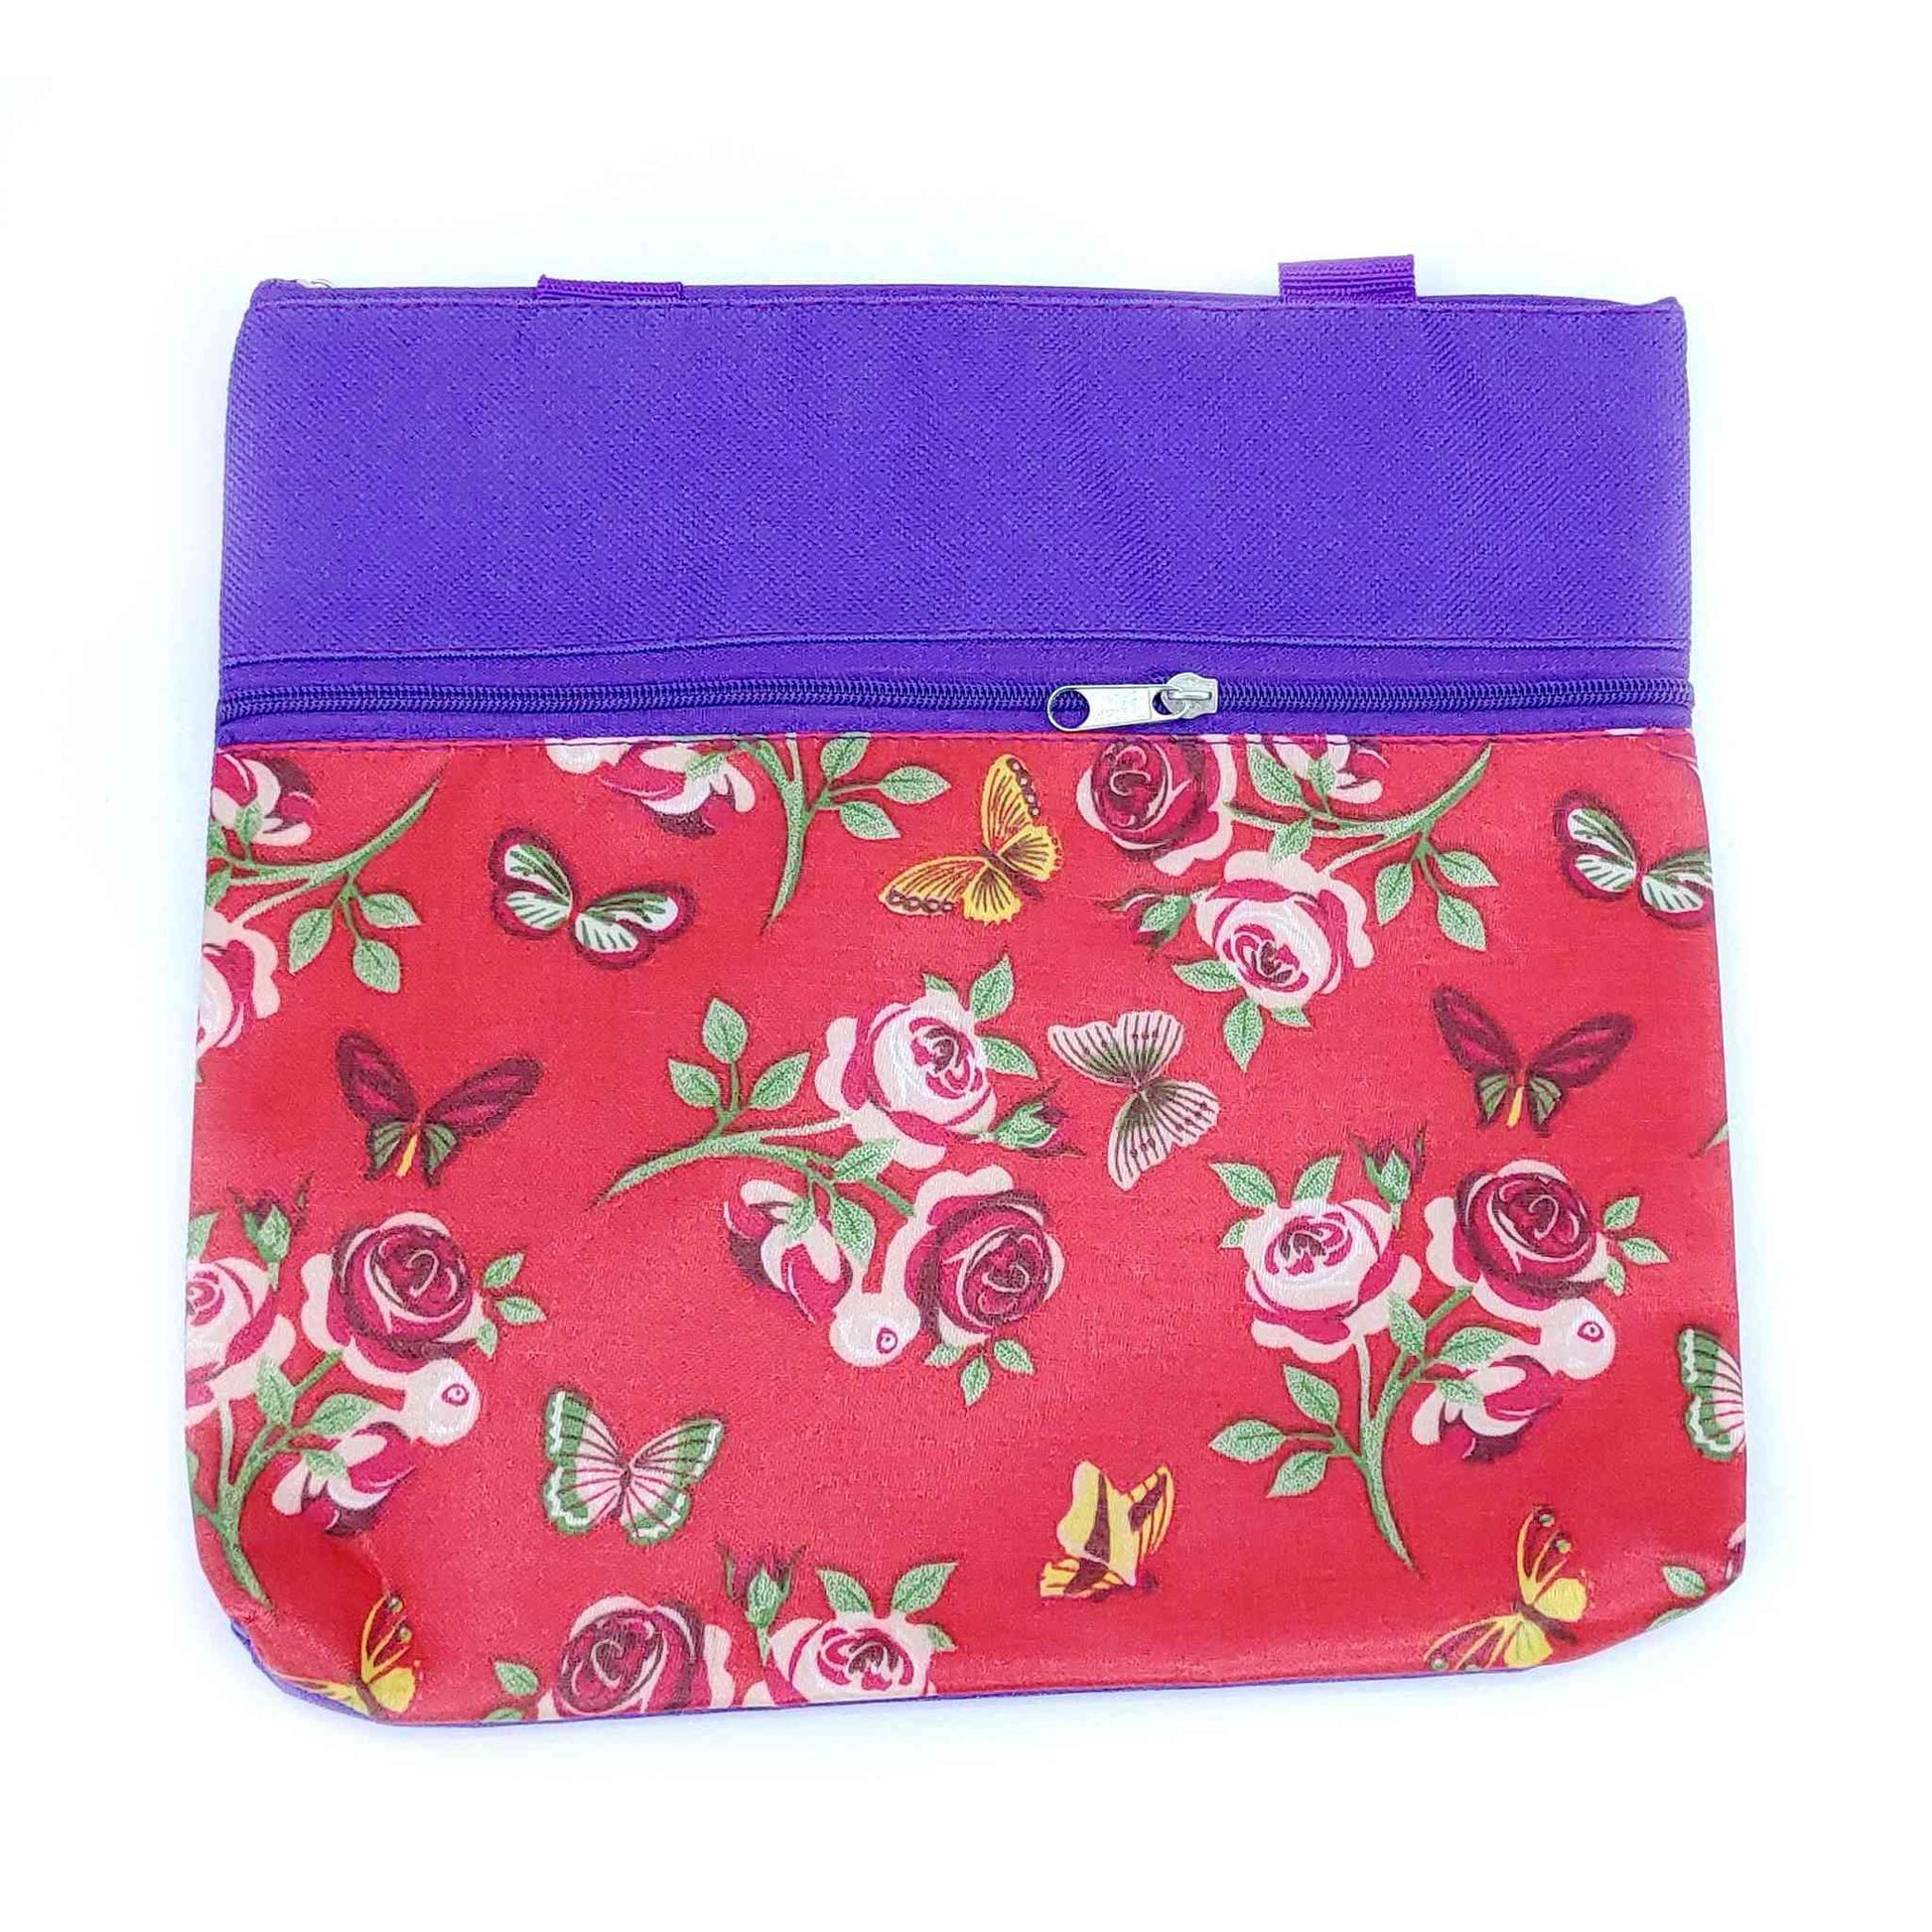 Indian Petals Imported Durable Canvas Printed multi purpose utility Medium size Bag with handles for all occasions for the girls and ladies, Design 3, Purple - Indian Petals